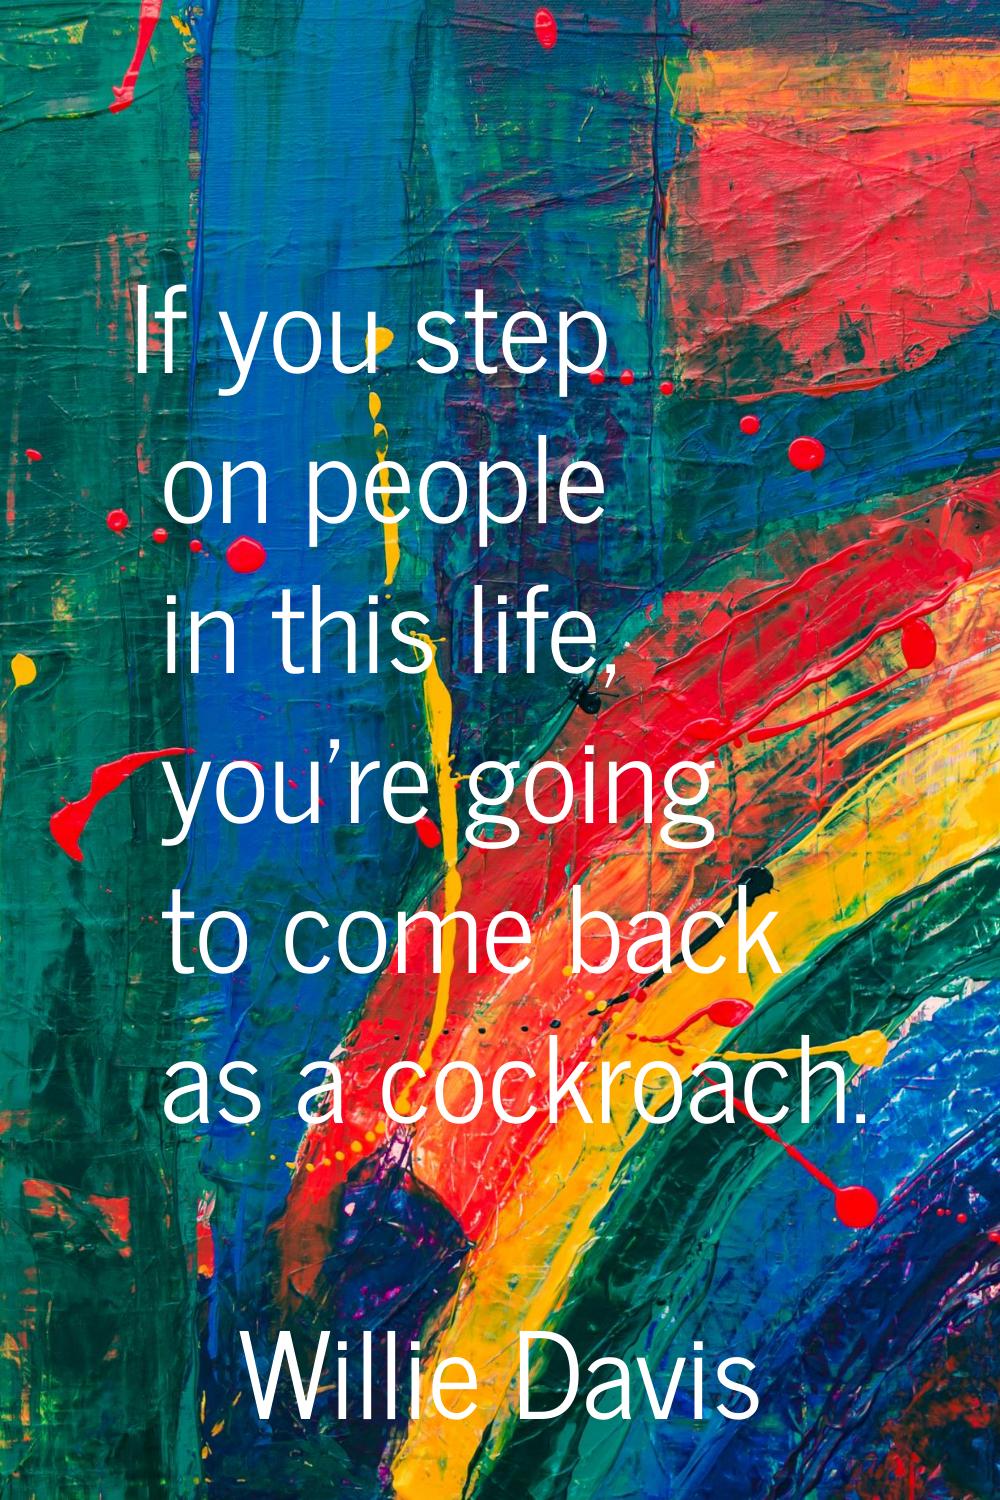 If you step on people in this life, you're going to come back as a cockroach.